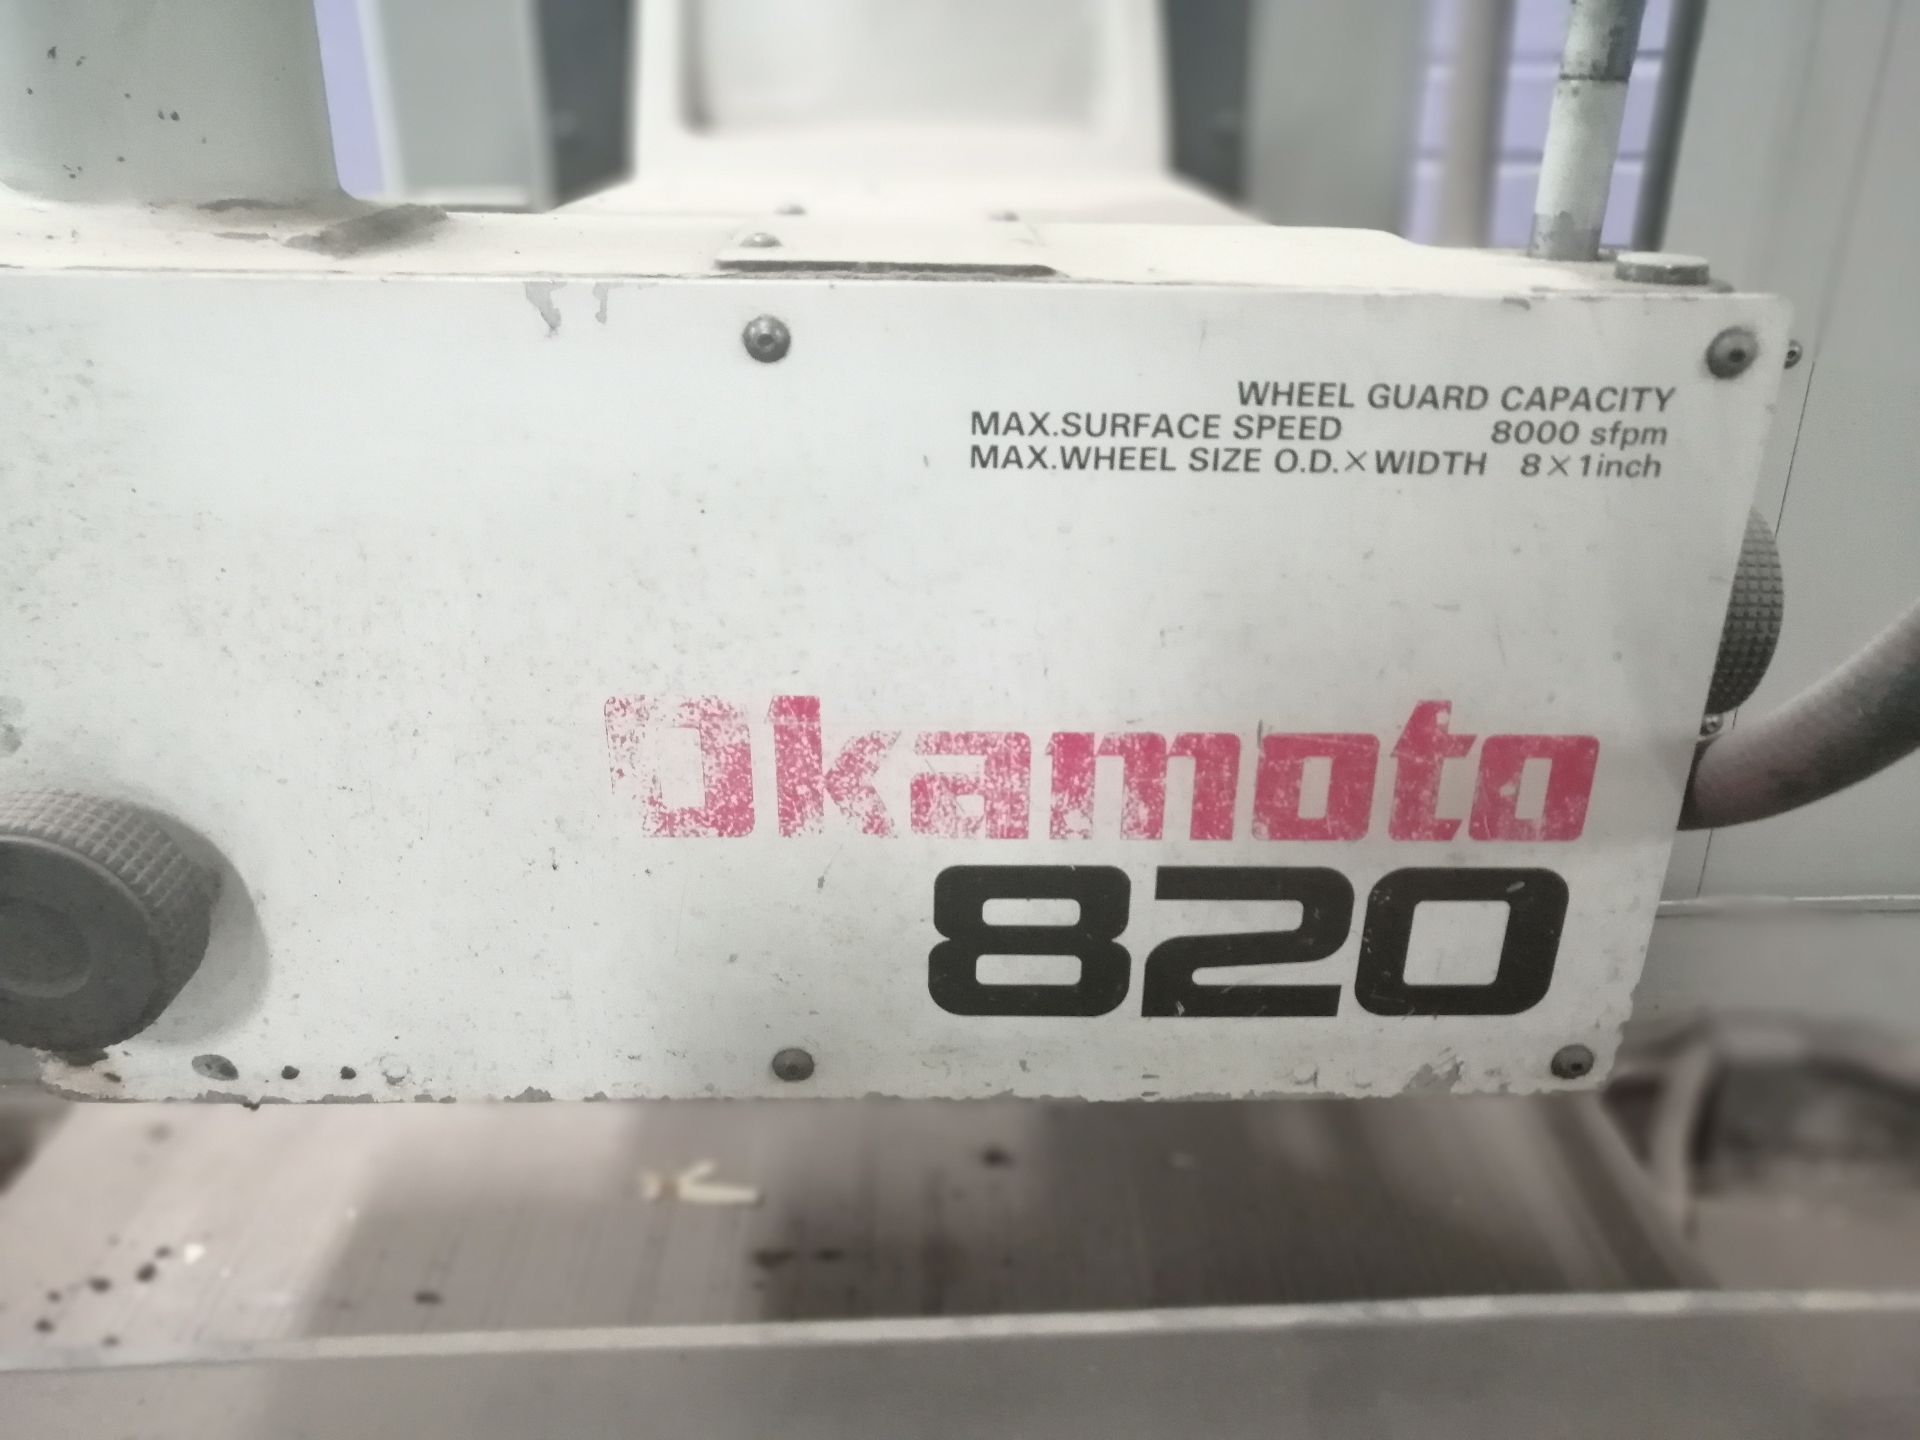 OKOMOTO 820 SURFACE, GRINDERS *unknow condition/missing parts Loading fee: 100$ Cad Item Location - Image 3 of 10